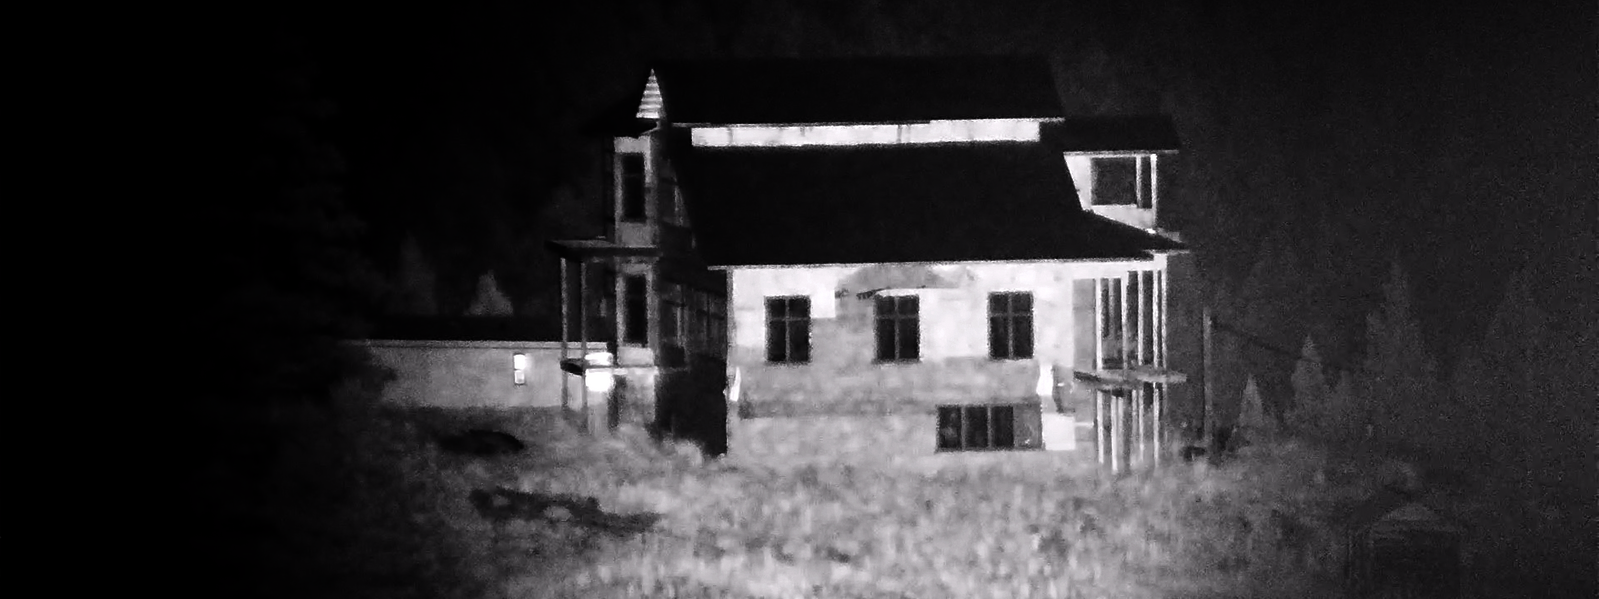 Image of ZLID illumination on a building under construction 1 kilometer from the camera.